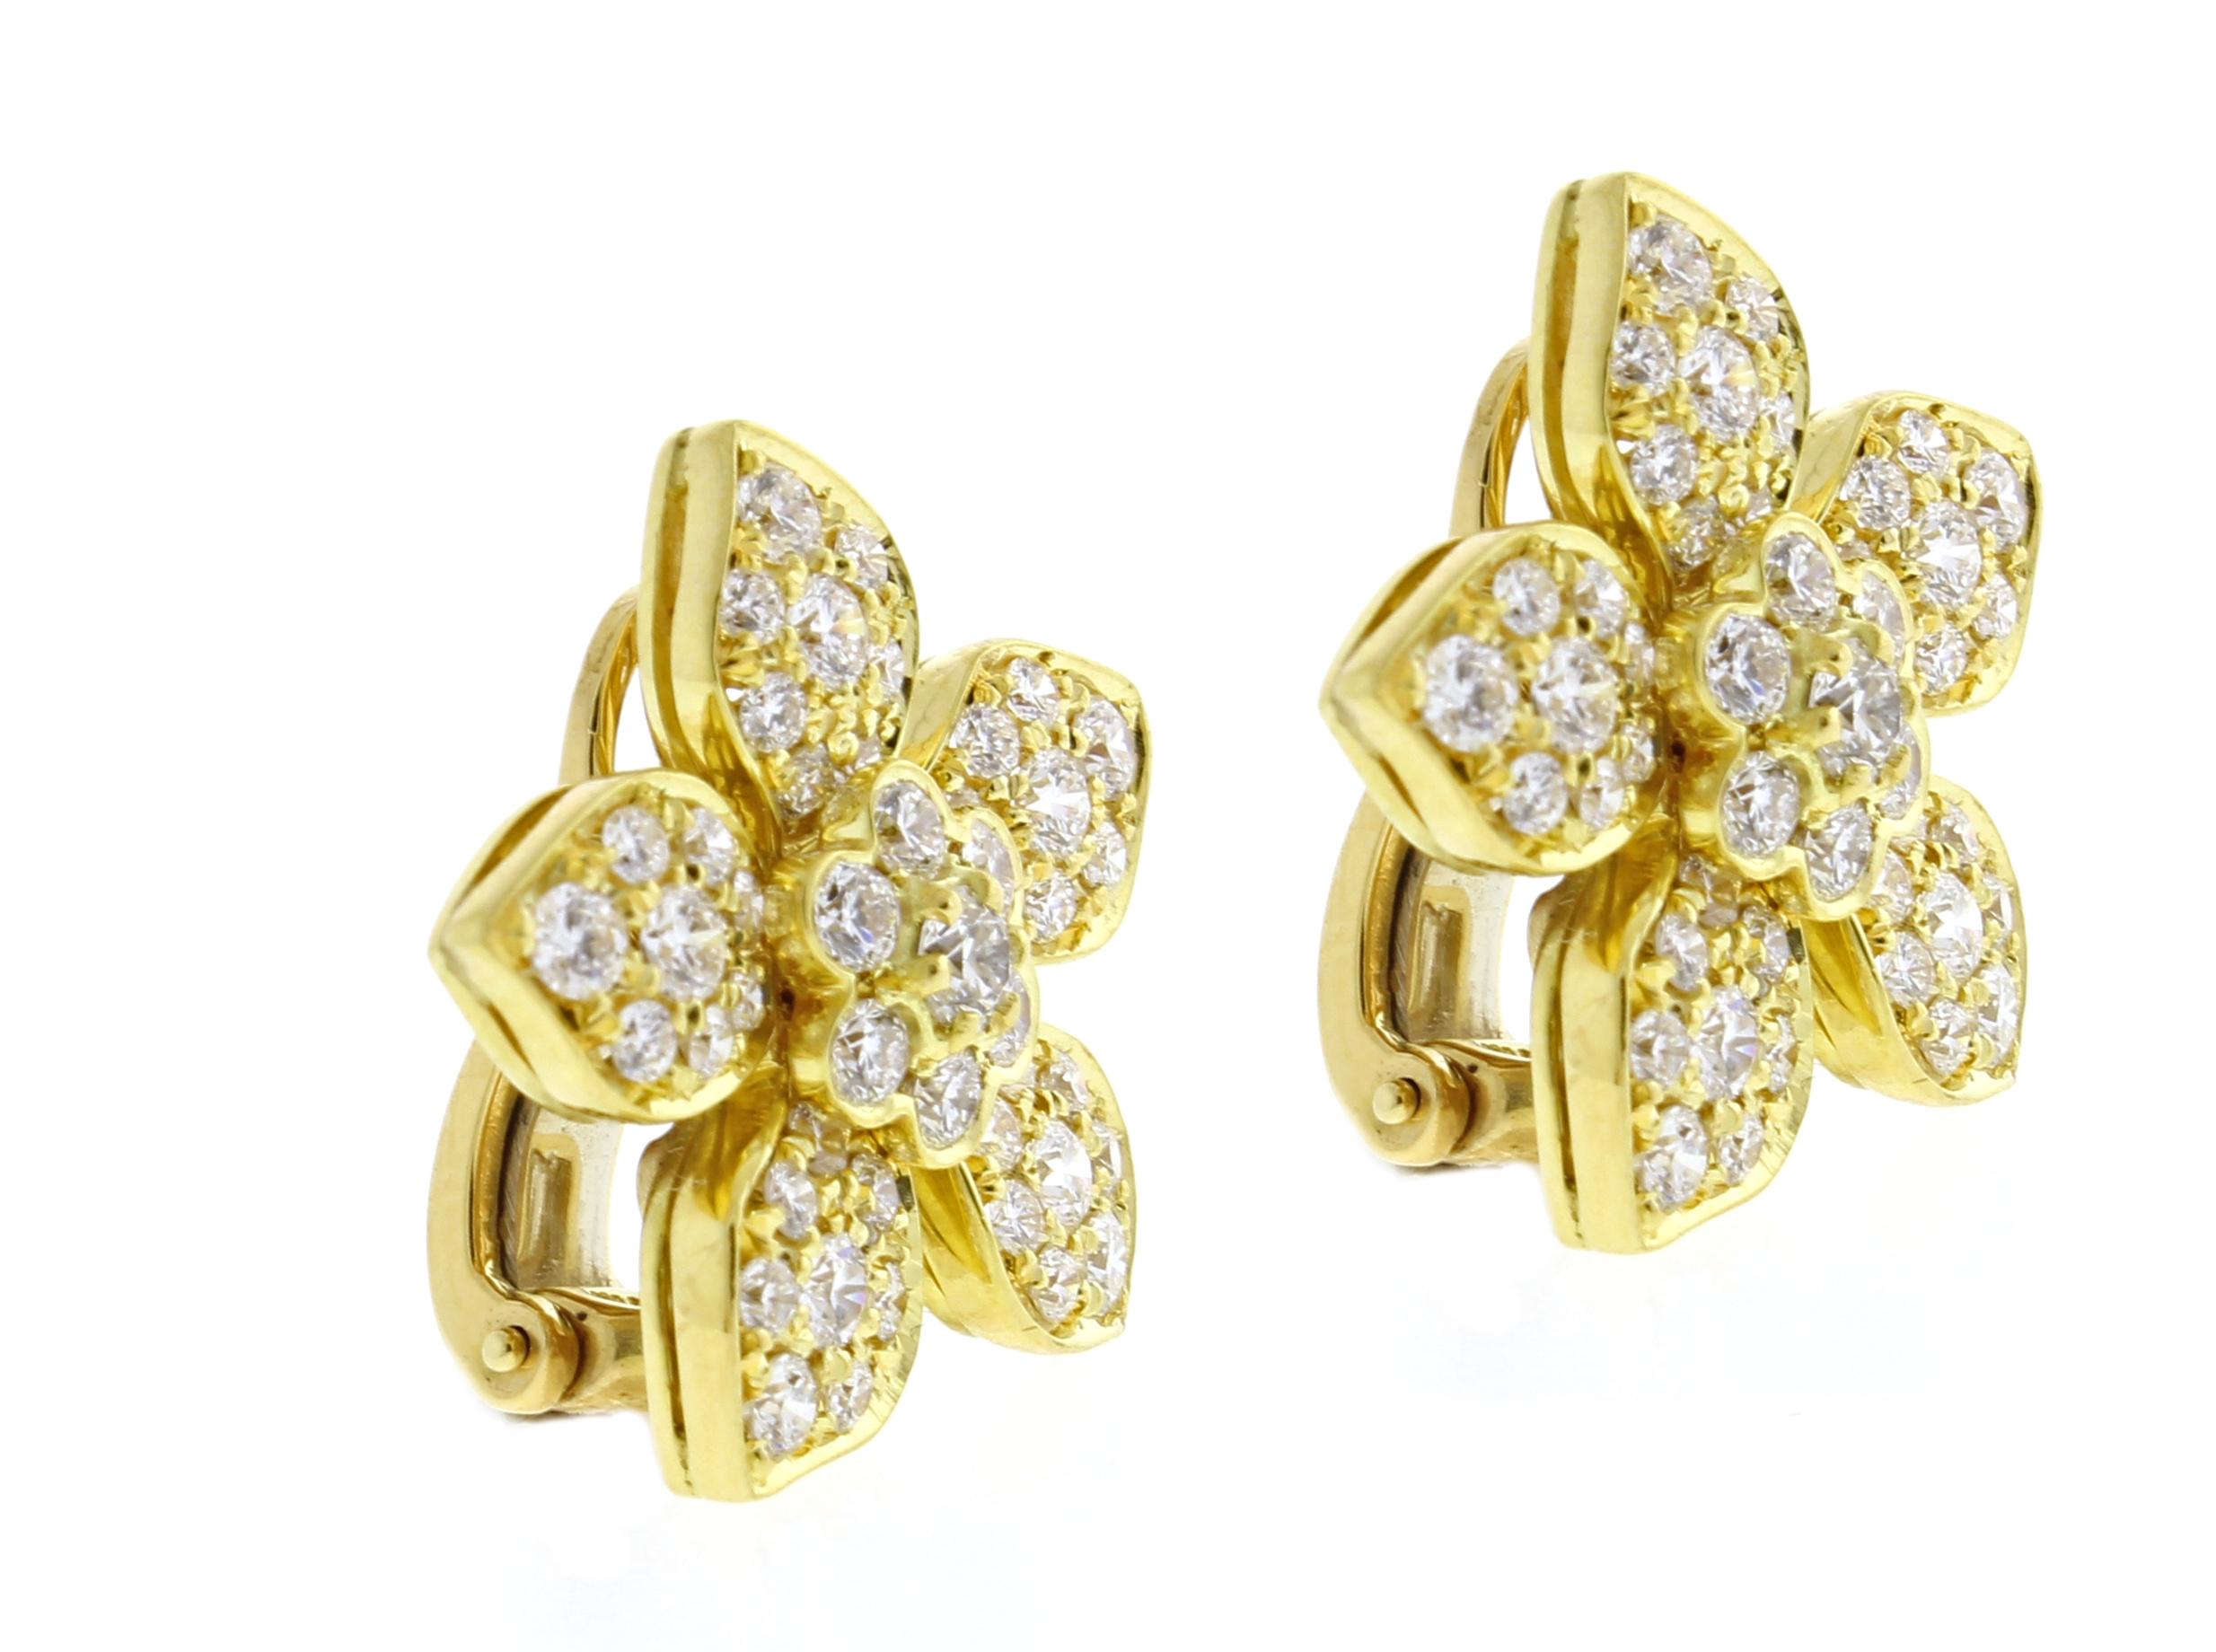 From Pampillonia Jewelers Fiore collection, a pair of diamond flower ear clips. The 18 karat gold earrings contain 49 brilliant diamonds weighing 2.49 carats.
♦ Designer: Pampillonia
♦ Metal: 18 karat
♦ 5/8 of an inch wide
♦ Circa 2018
♦ Packaging: